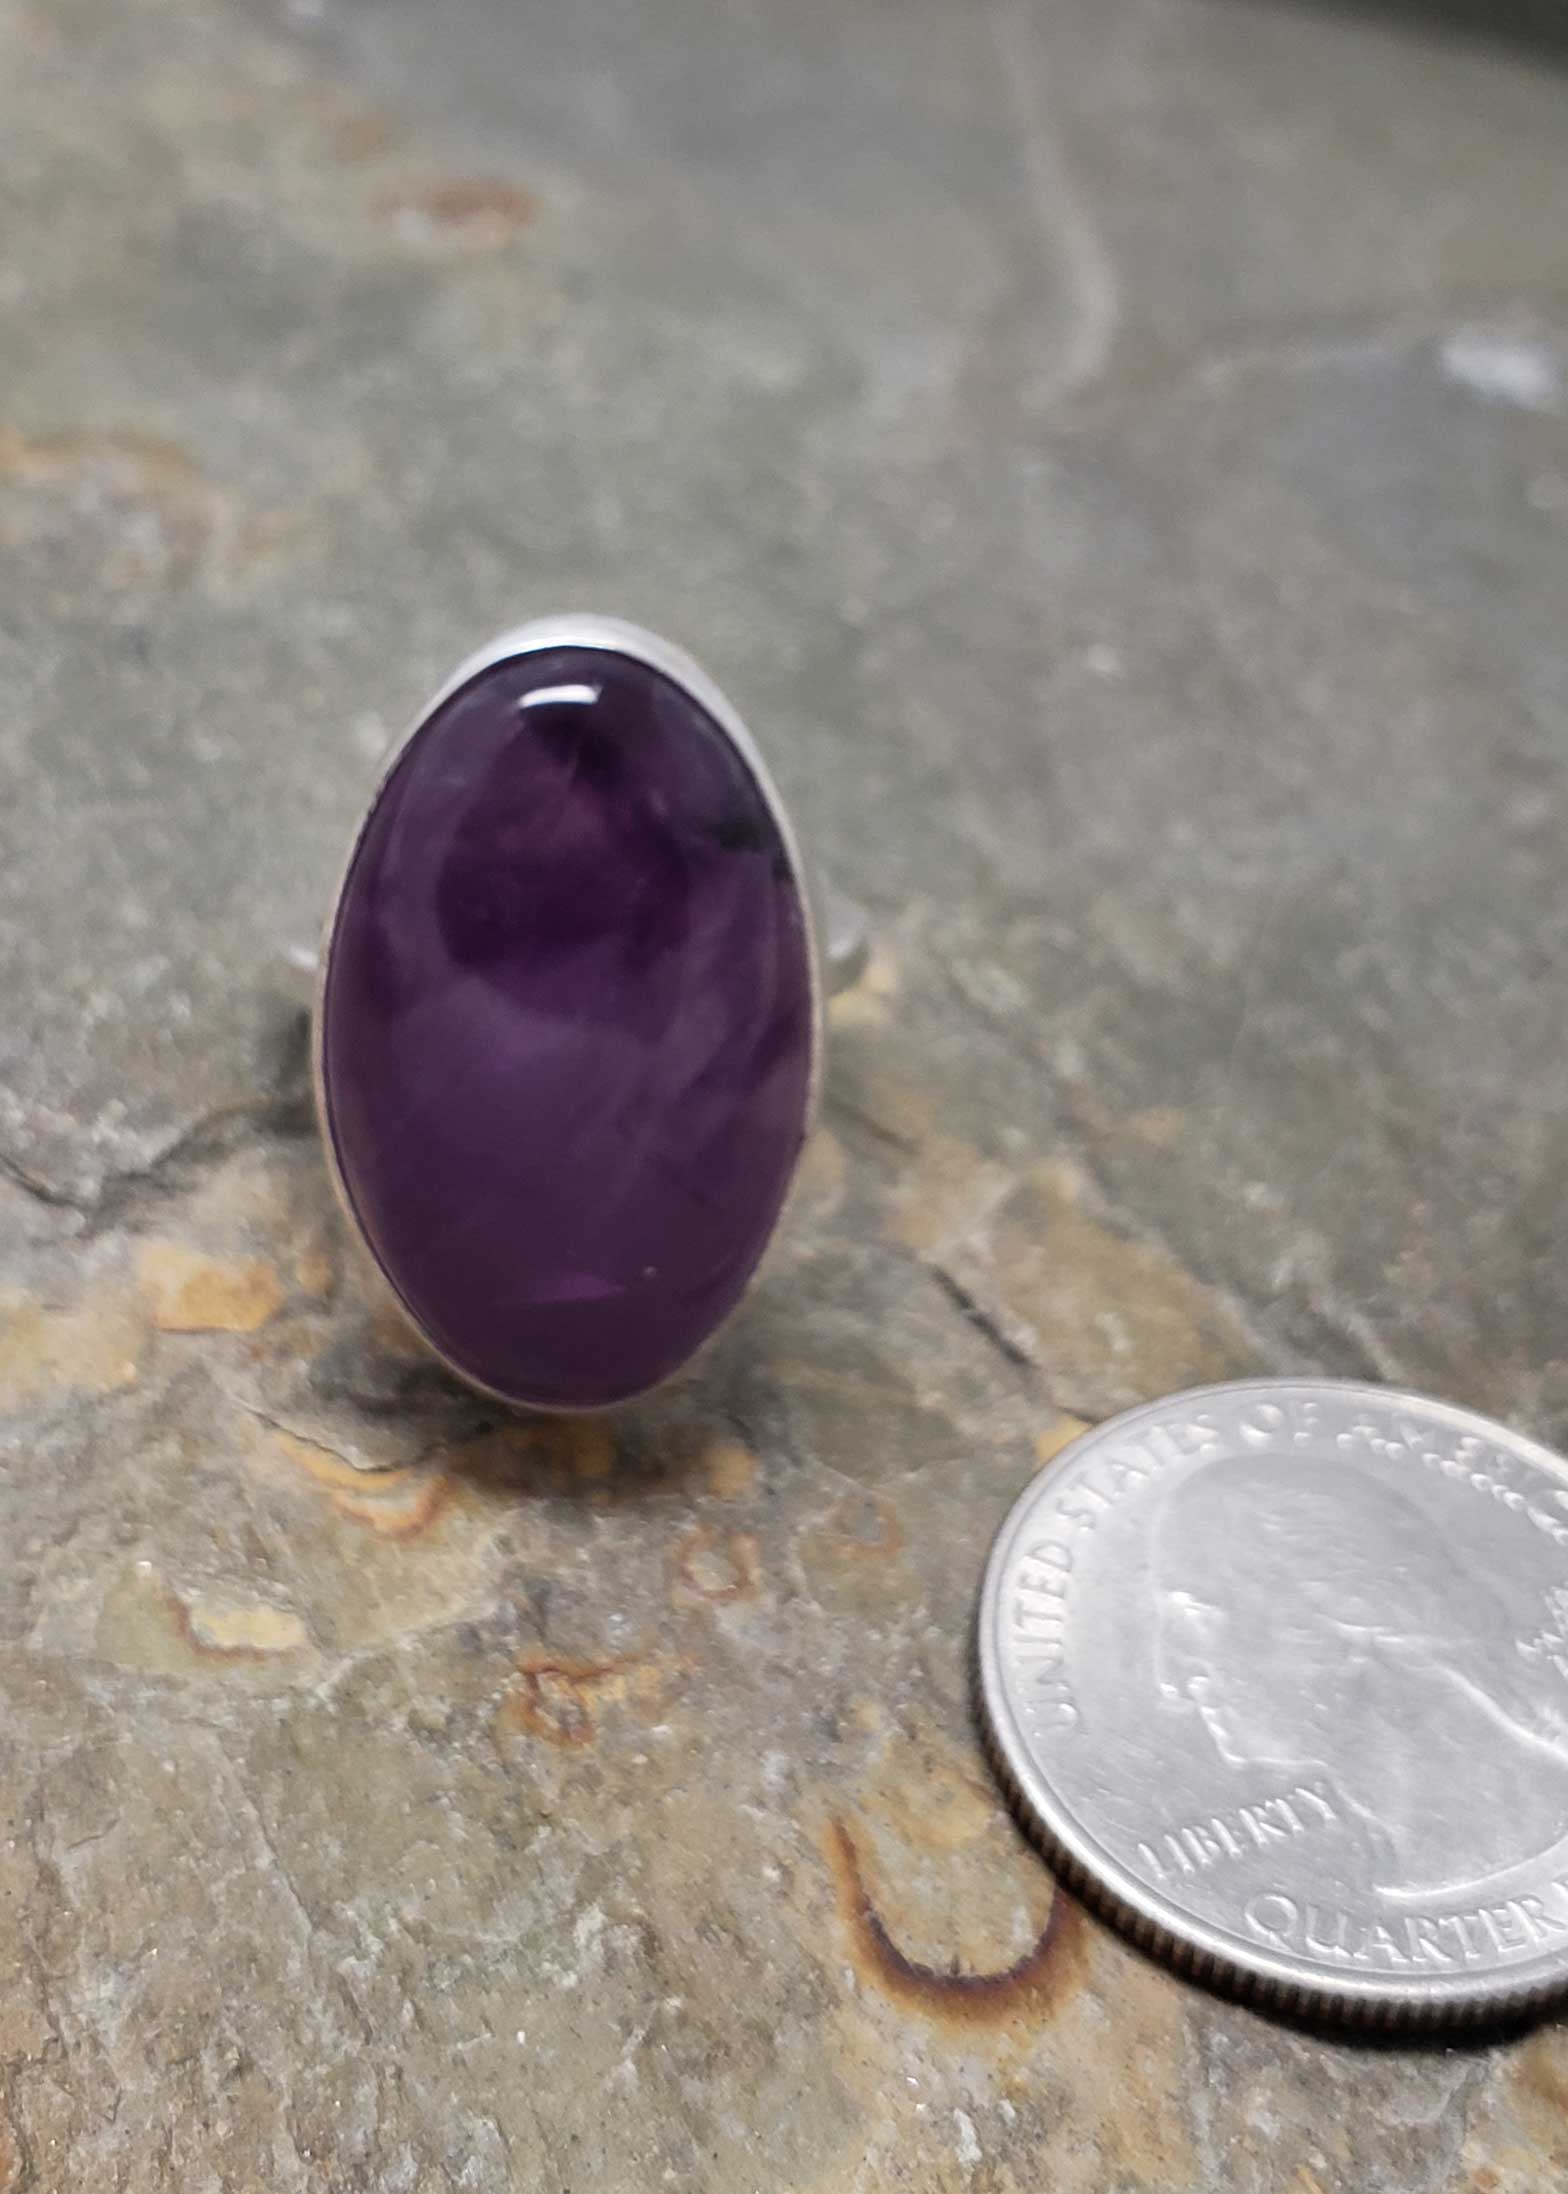 Amethyst oval statement ring in size 7.5.